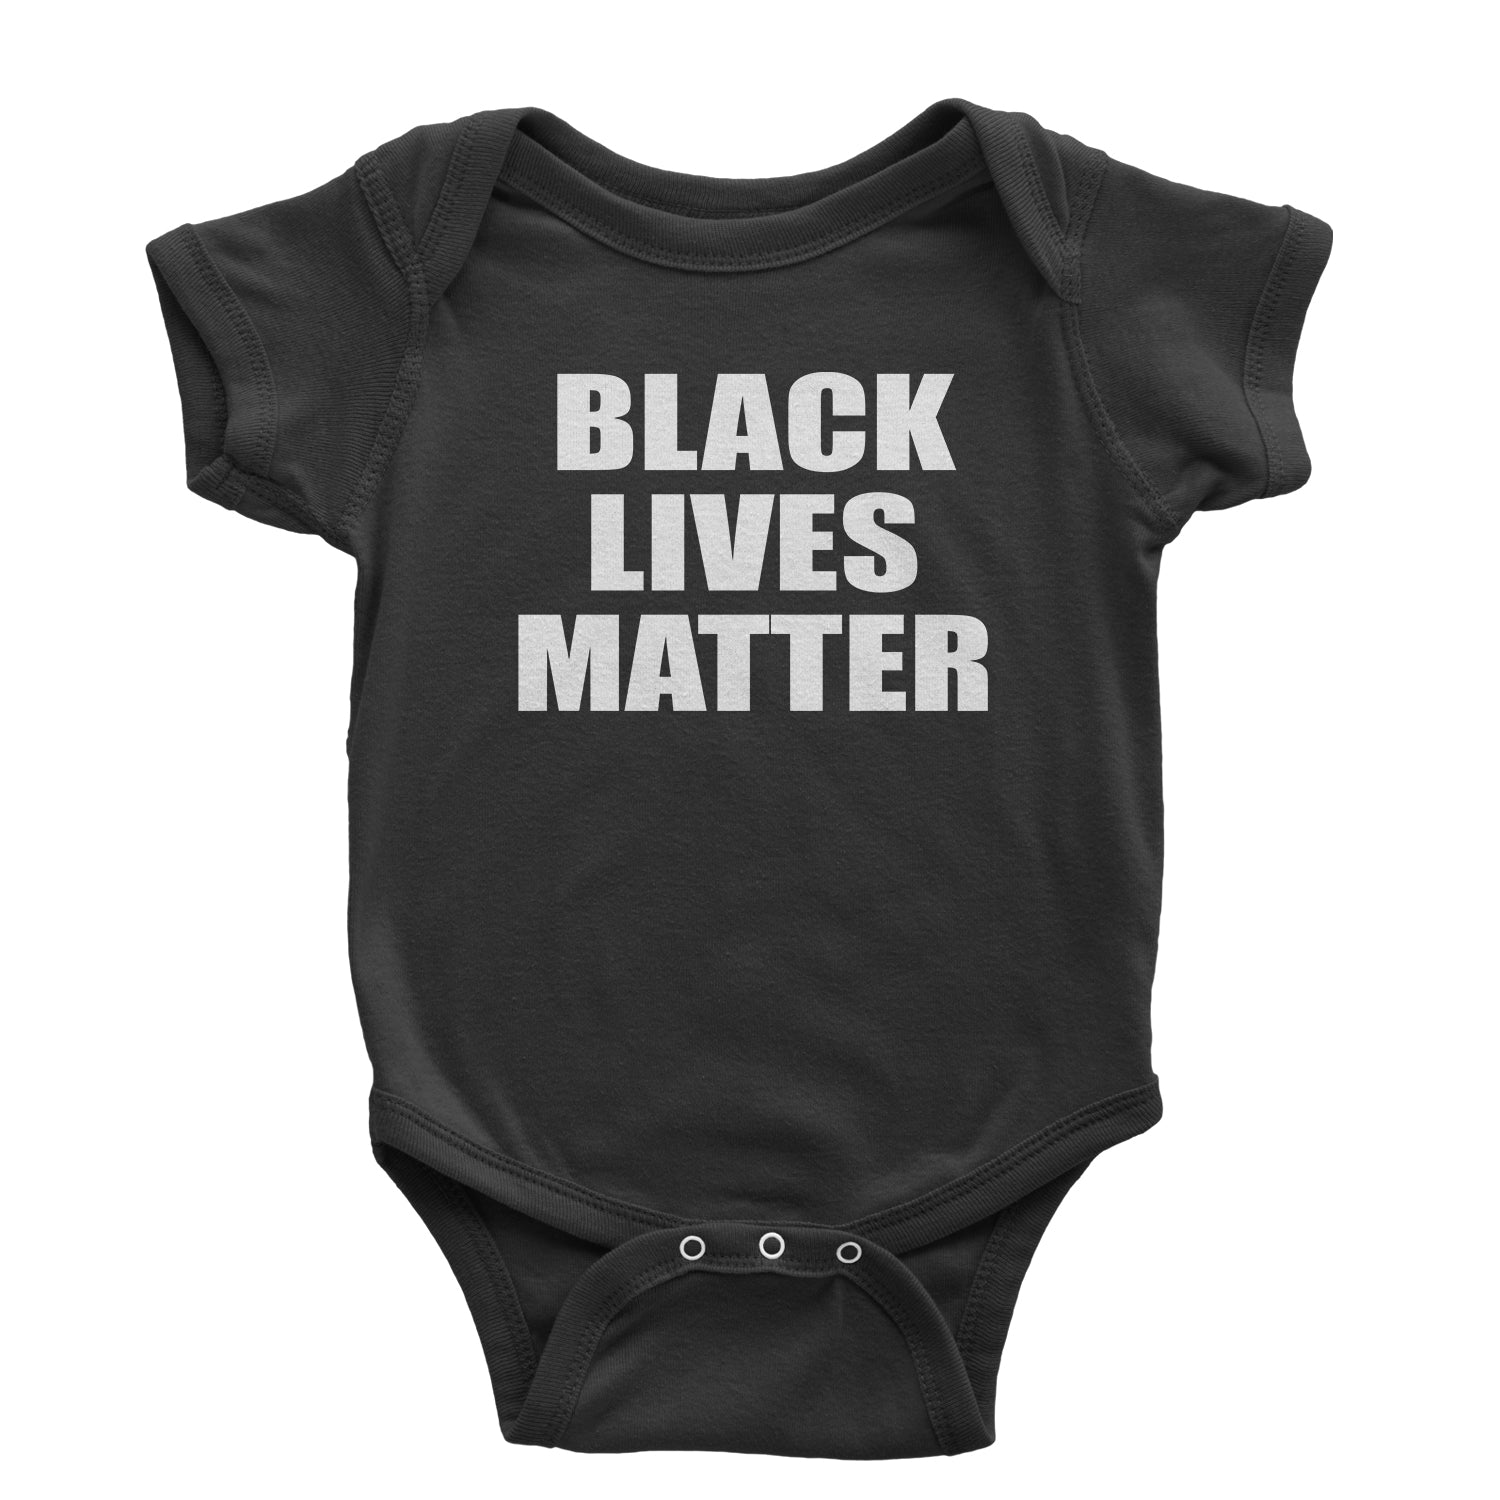 Black Lives Matter BLM Infant One-Piece Romper Bodysuit and Toddler T-shirt african, africanamerican, ahmaud, american, arberry, breonna, brutality, end, justice, taylor by Expression Tees